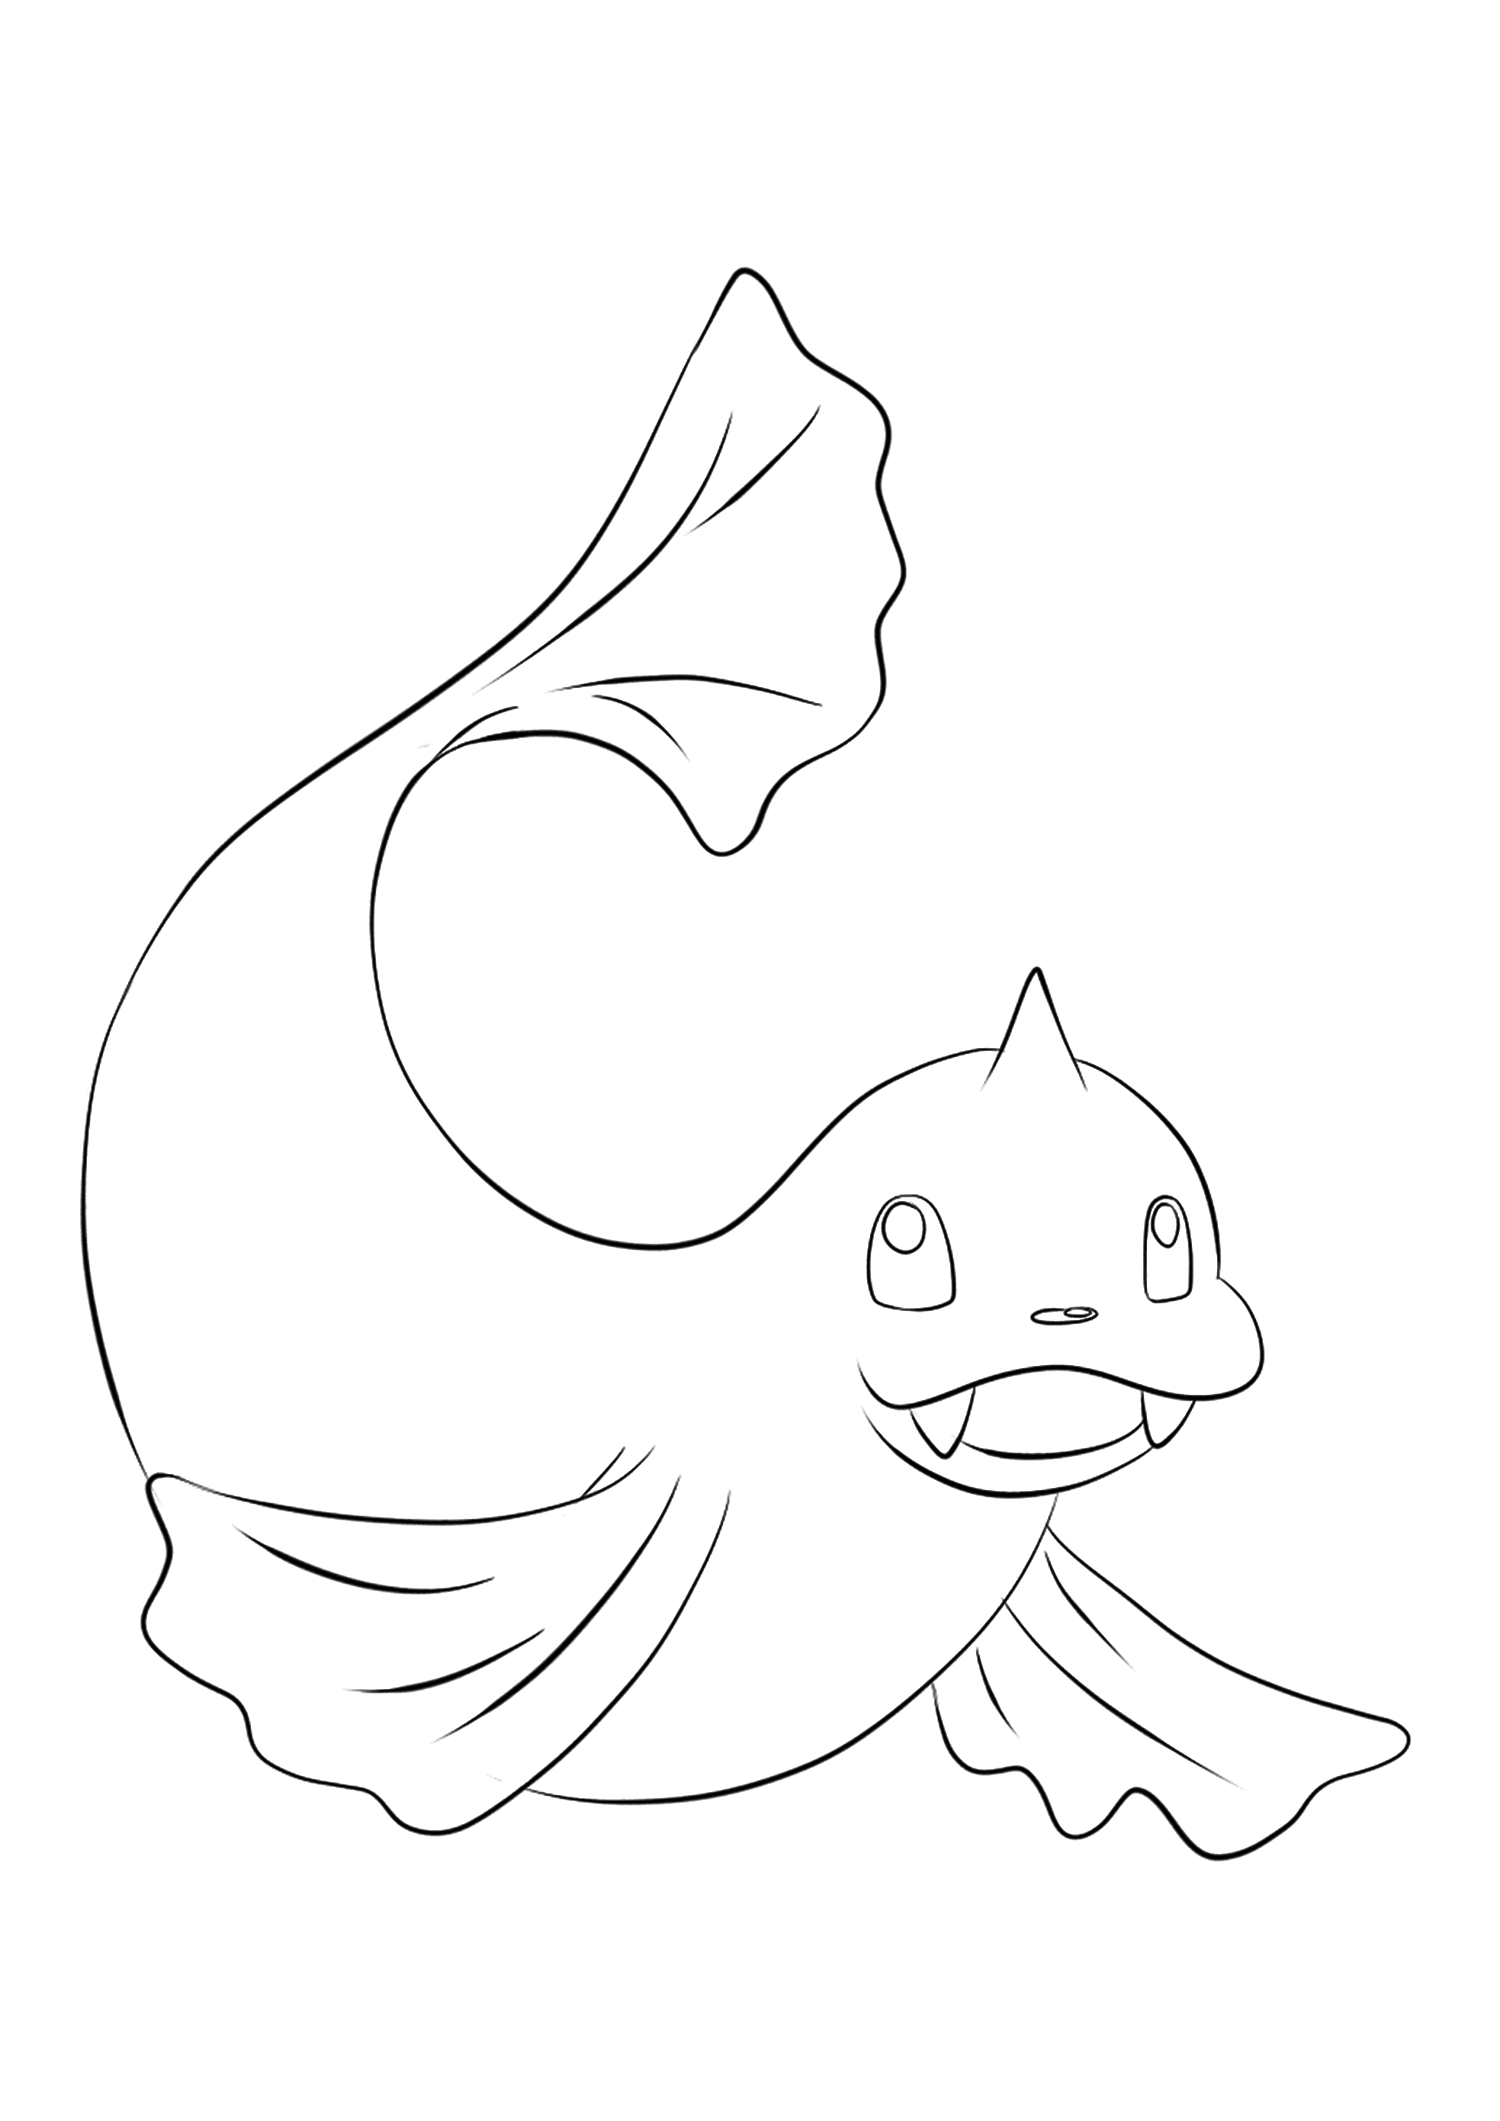 Dewgong (No.87). Dewgong Coloring page, Generation I Pokemon of type Water and IceOriginal image credit: Pokemon linearts by Lilly Gerbil on Deviantart.Permission:  All rights reserved © Pokemon company and Ken Sugimori.